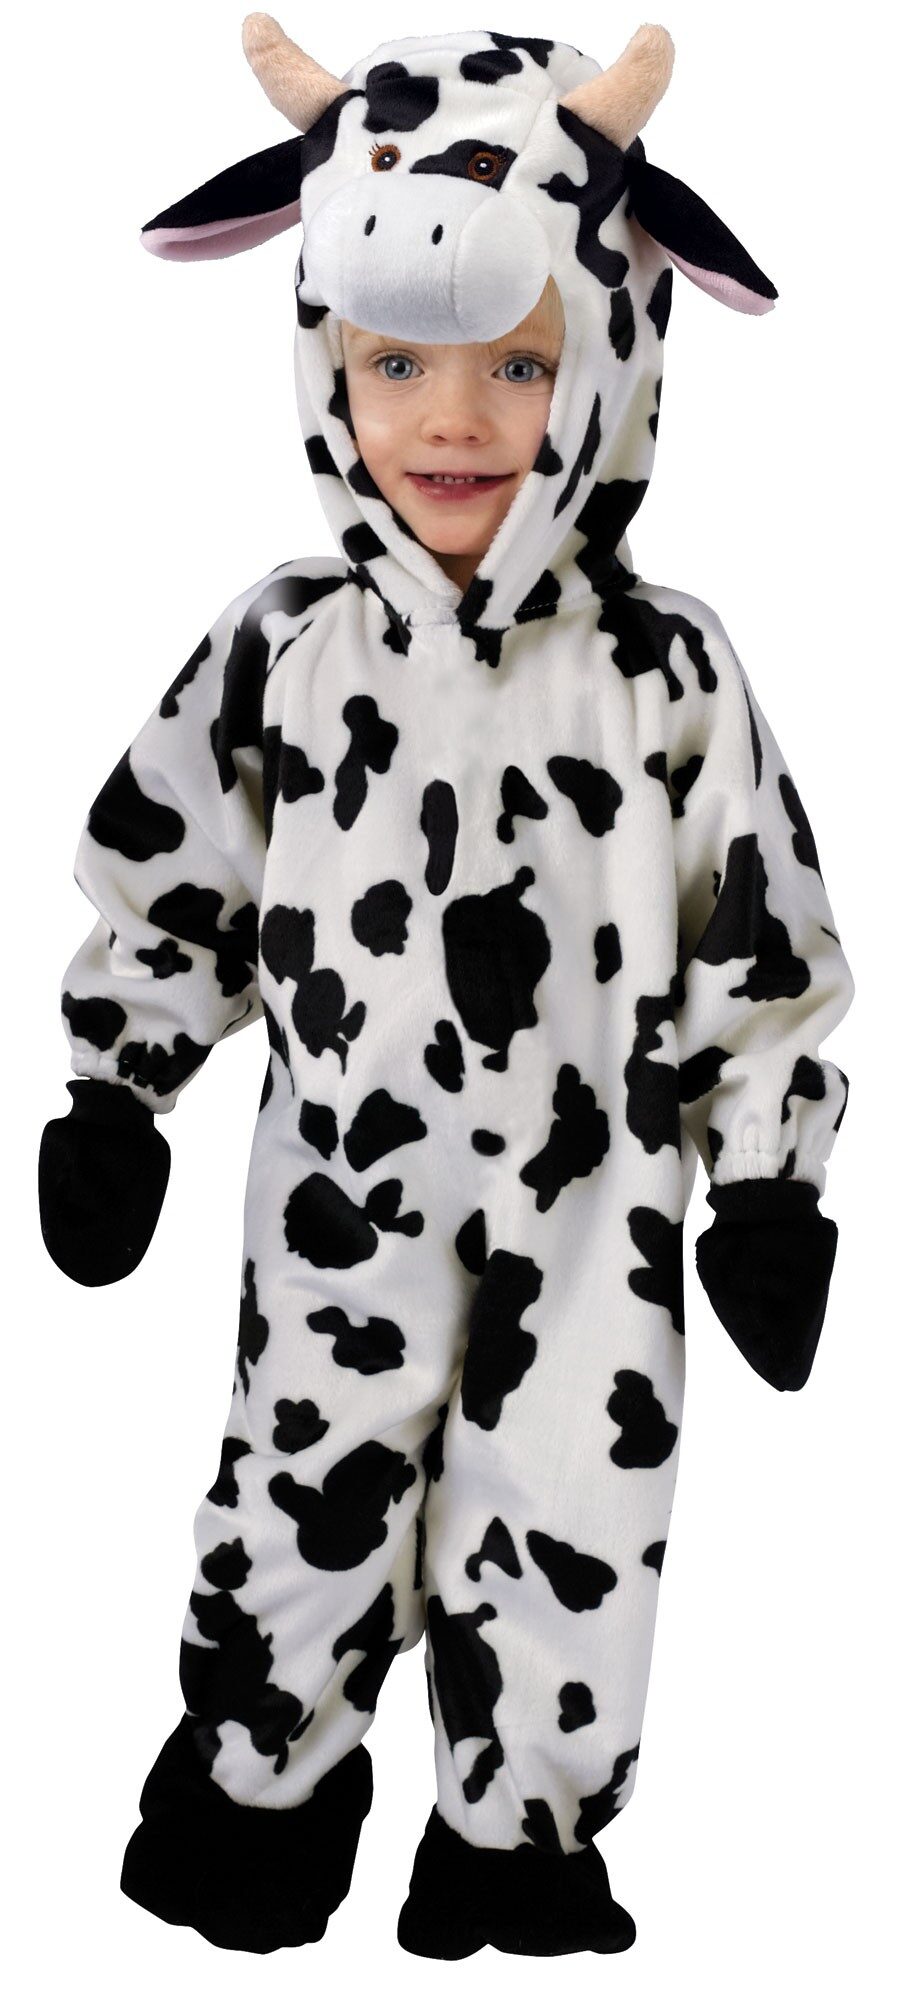 Cuddly Cow Baby Toddler Costume - Mr. Costumes